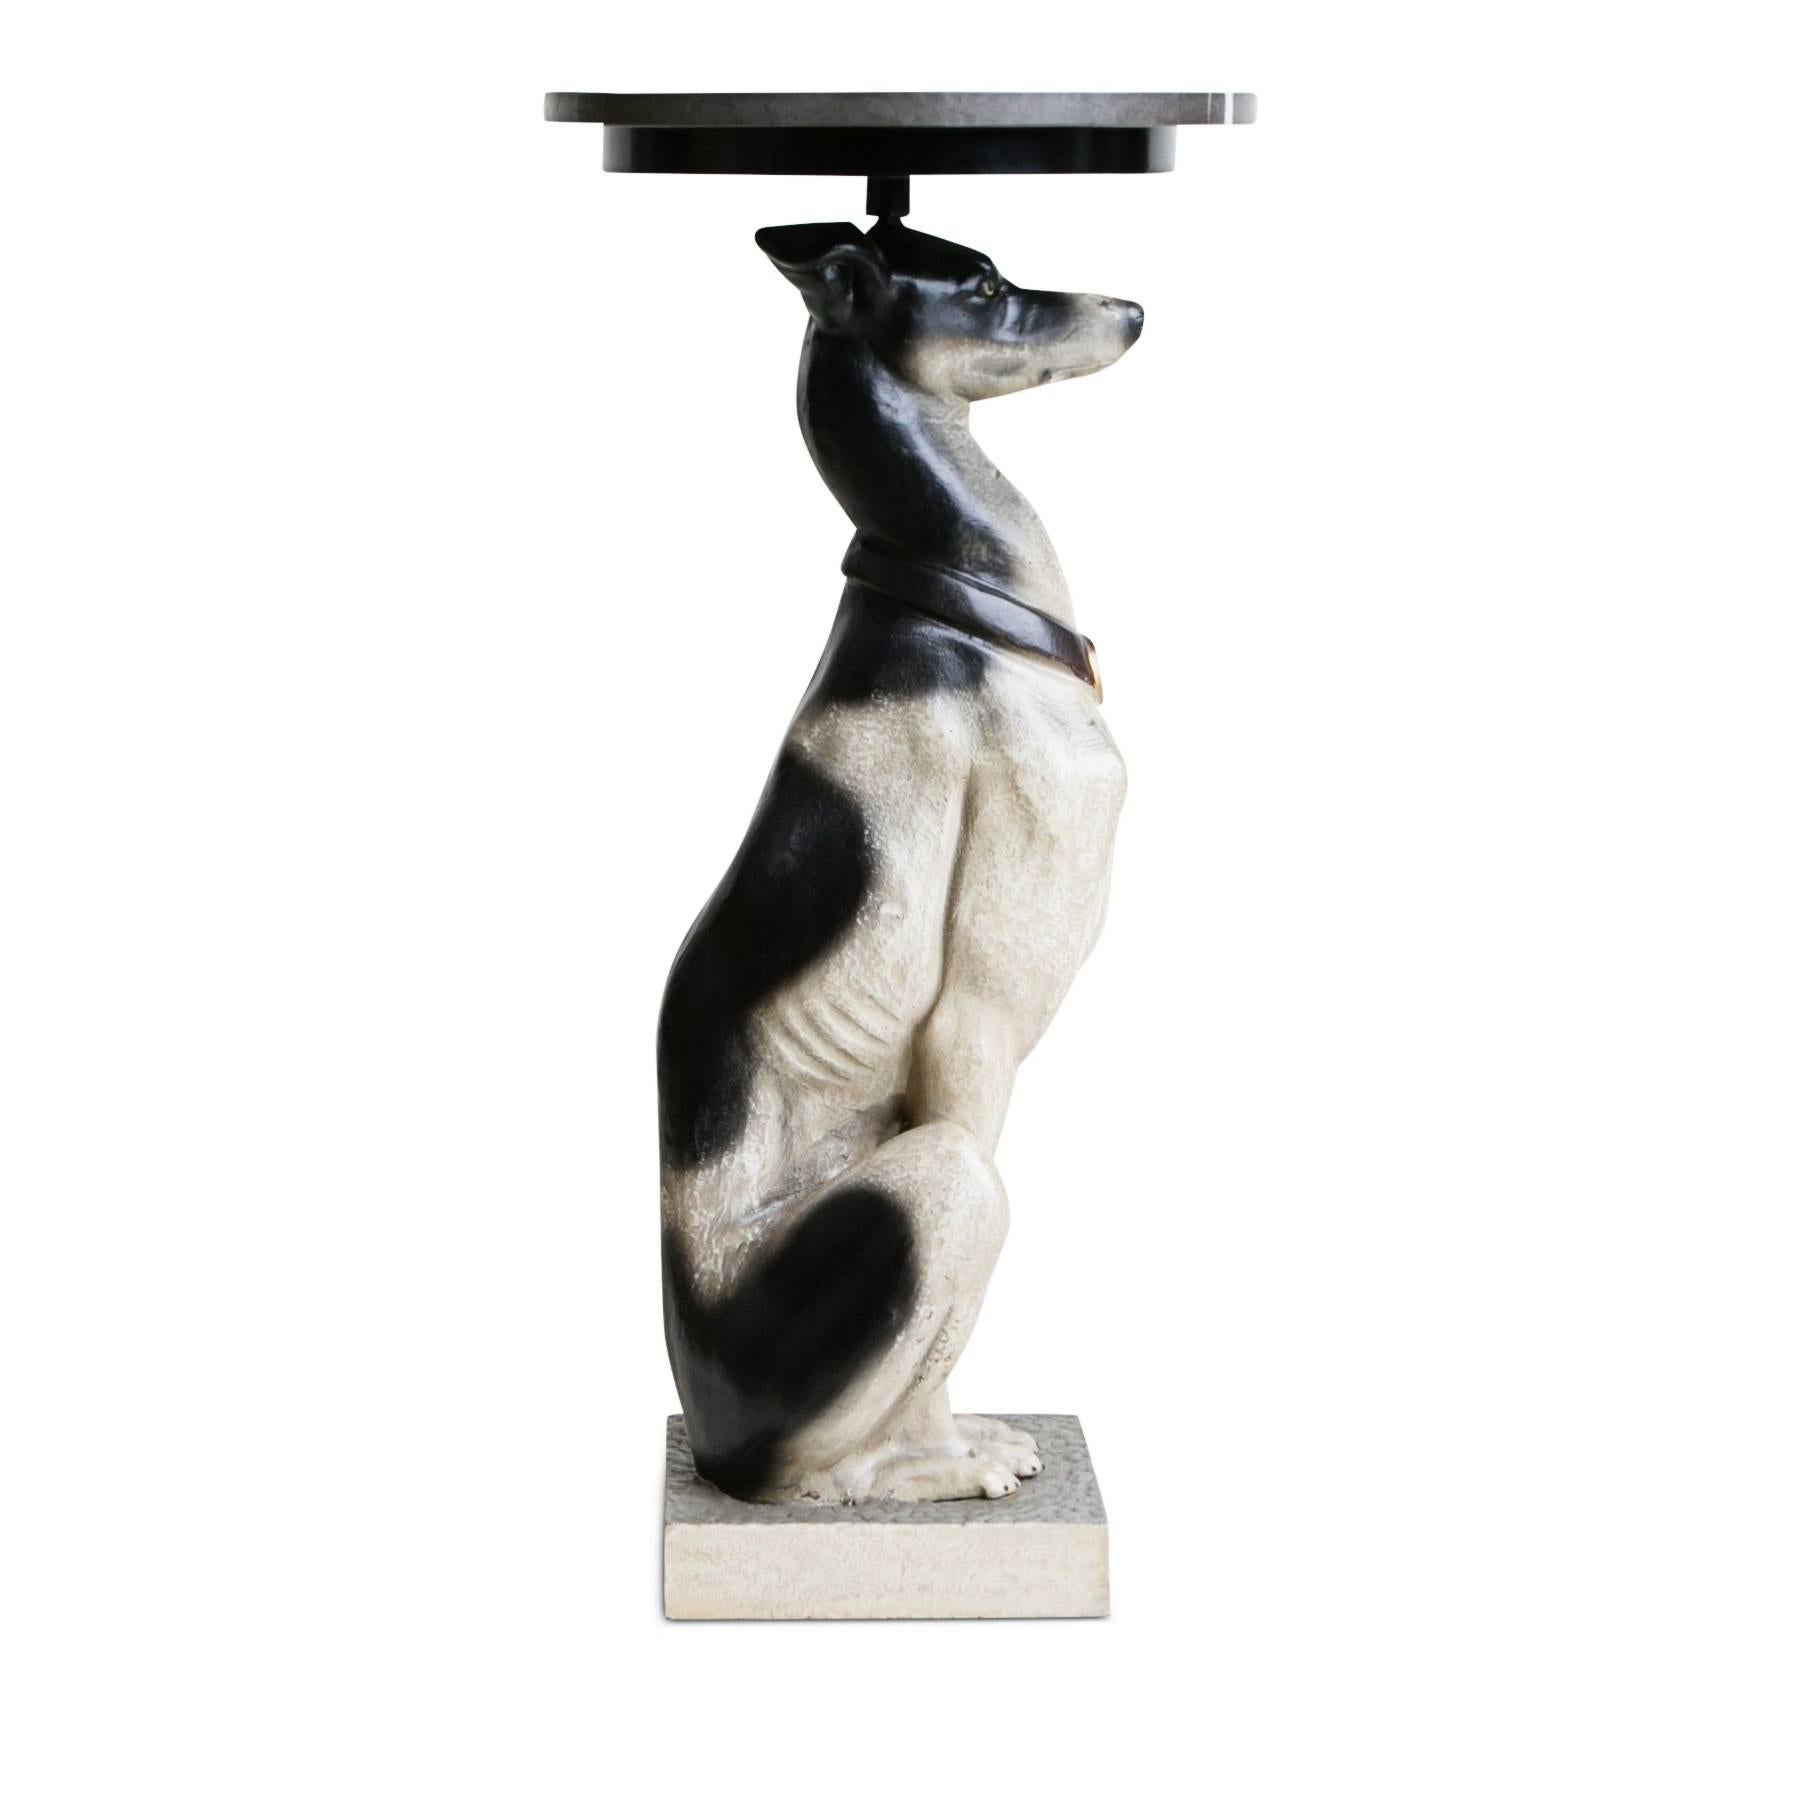 Pair of (two) Whippet sculpture pedestals fabricated from patinated metal and topped with Pietra Grigio gray limestone tops displaying beautifully contrasting movement and veining. 

This idiosyncratic Maison Jansen styled couple would add an